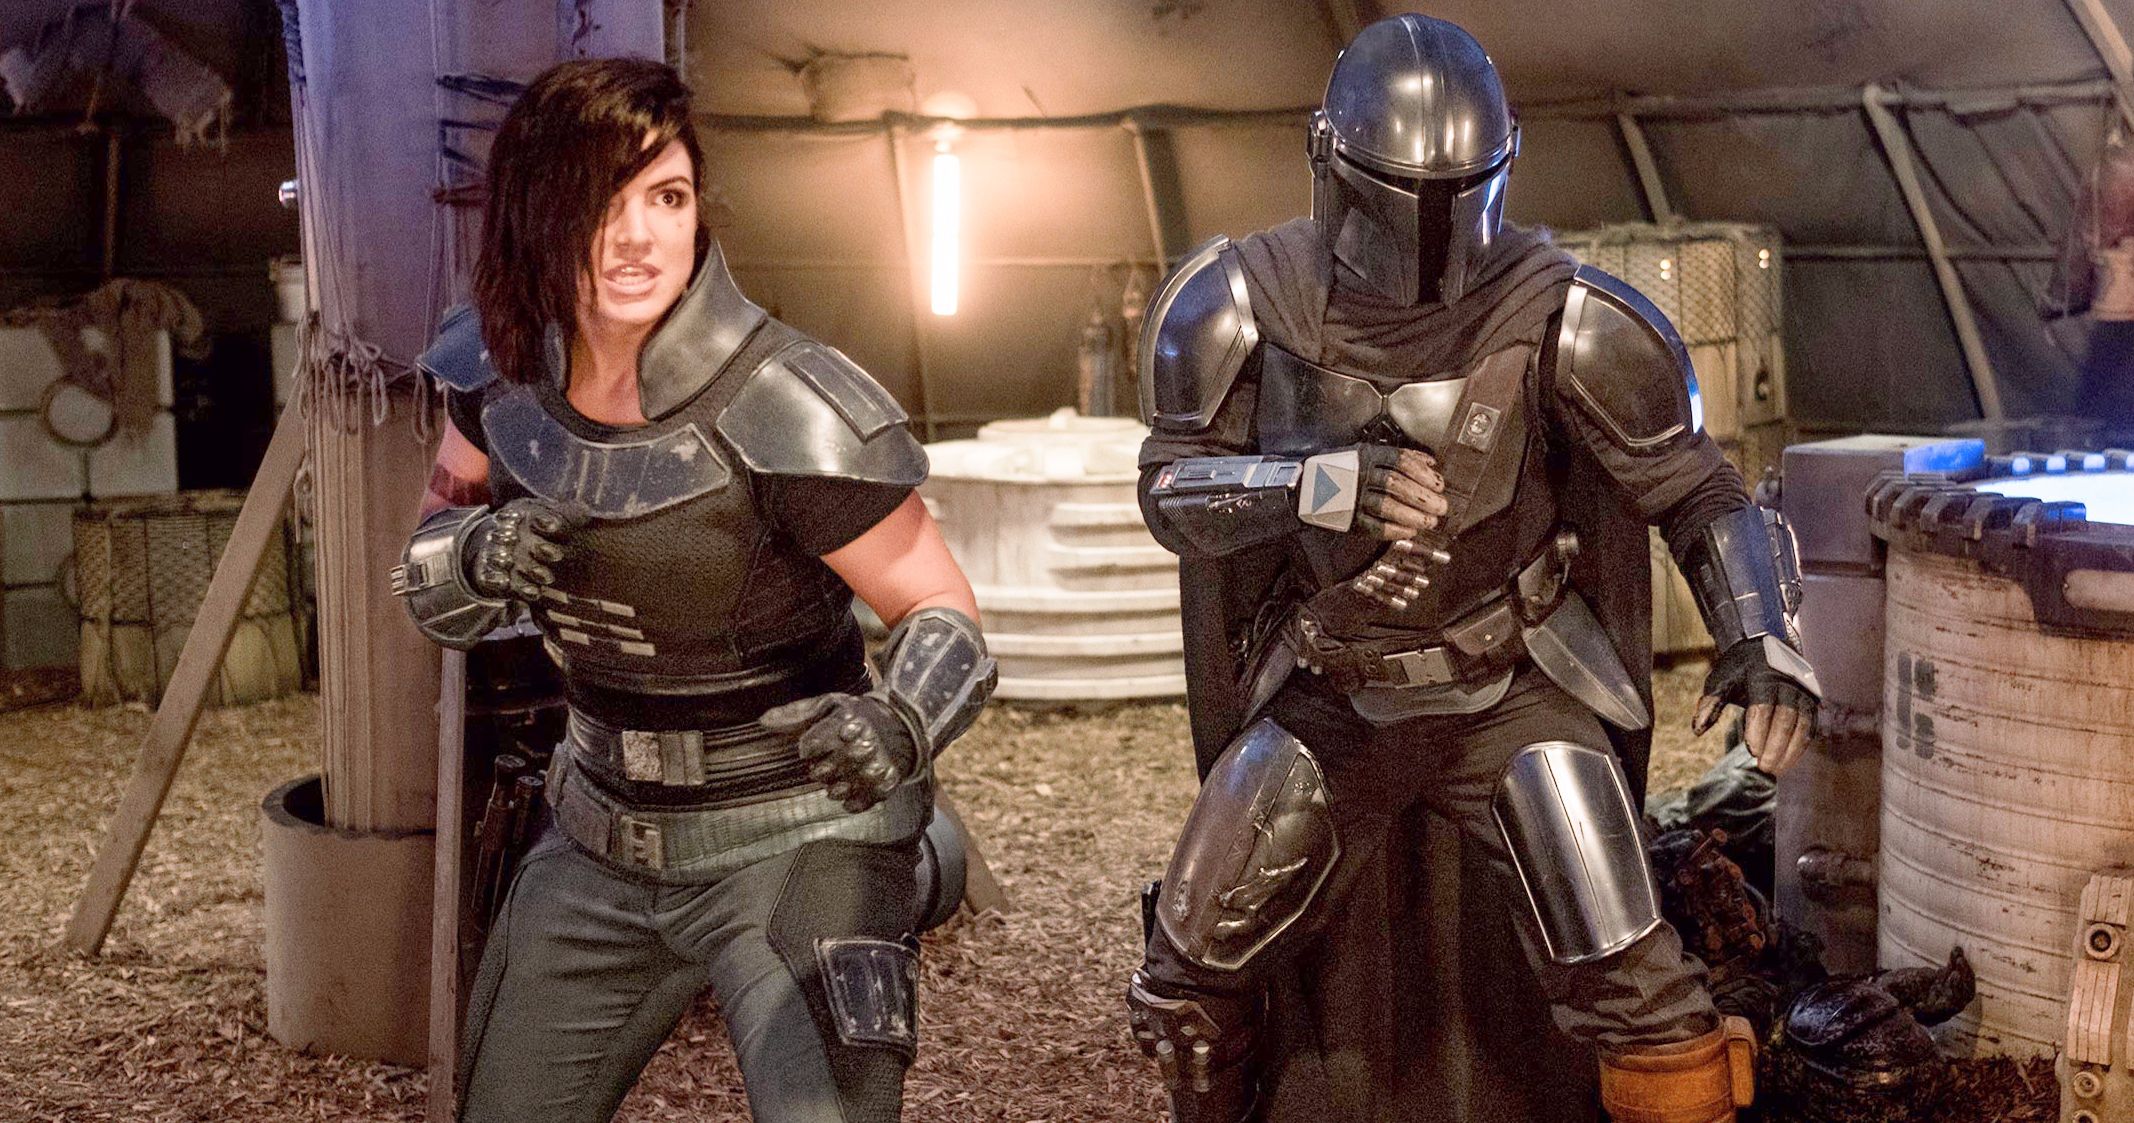 The Mandalorian Teams with Ex-Shock Trooper Cara Dune in Latest Battle Ready Look